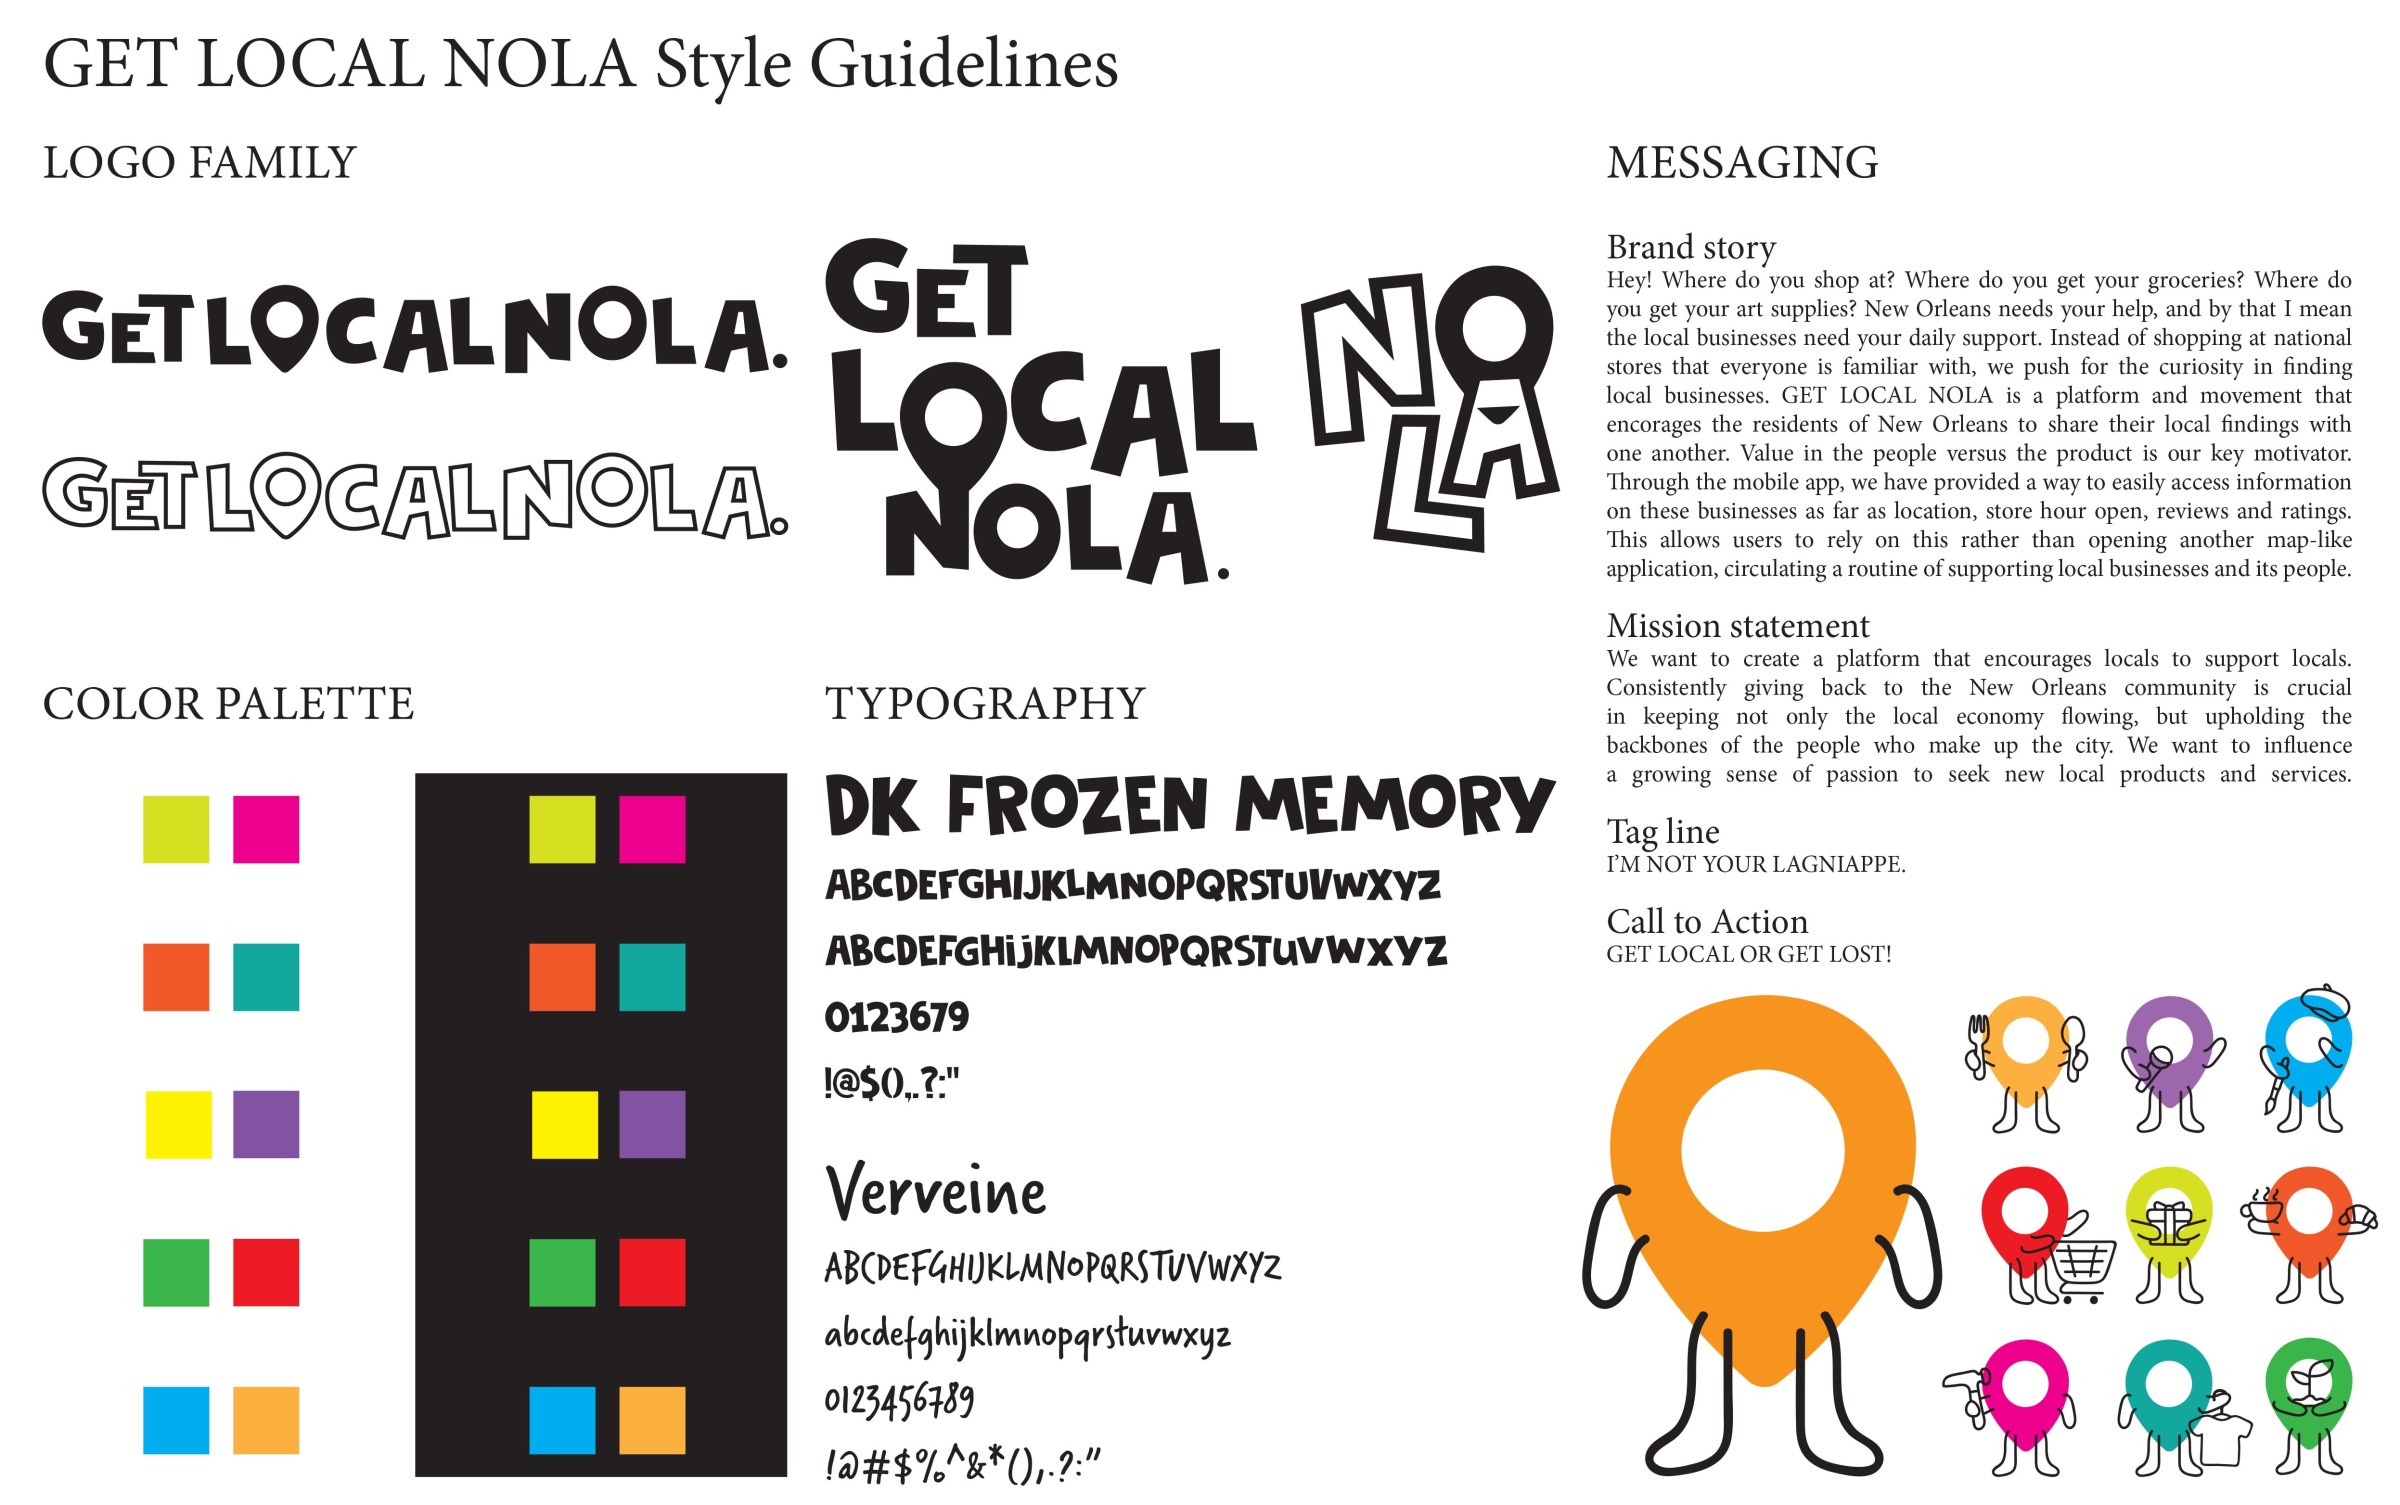 Style Guidelines for student project "GET LOCAL NOLA"